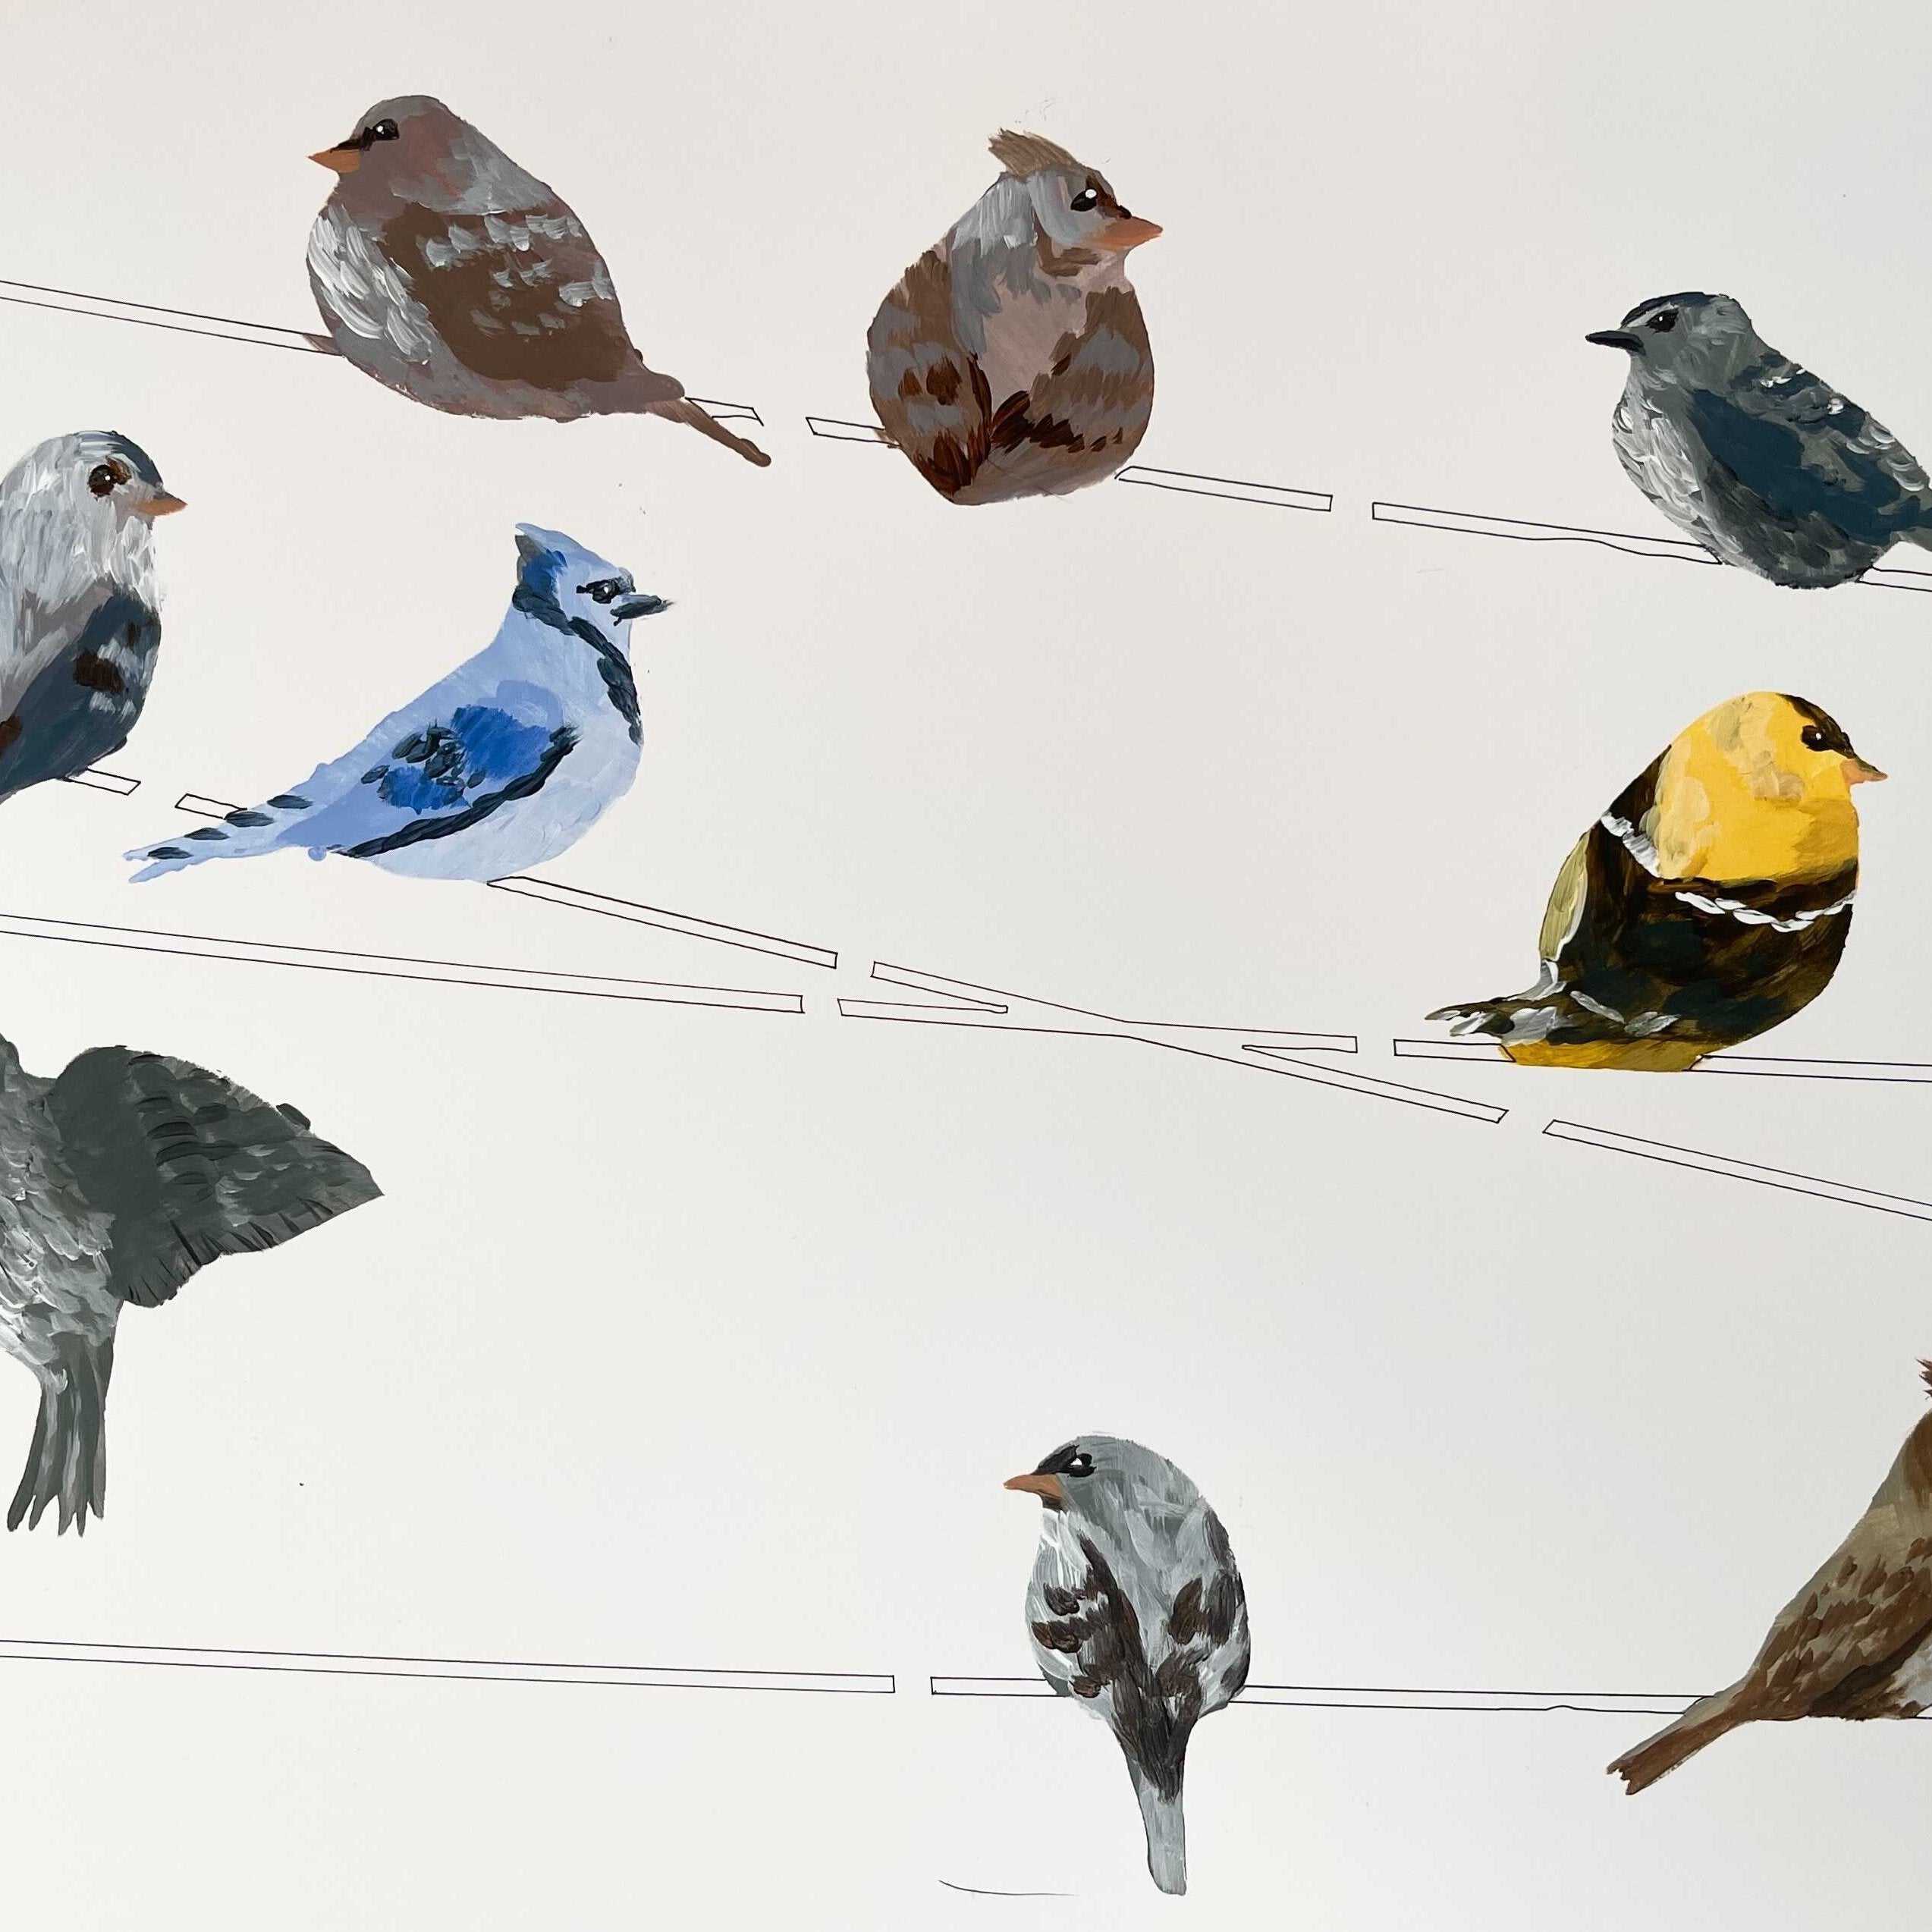 different kinds of birds sitting on wires